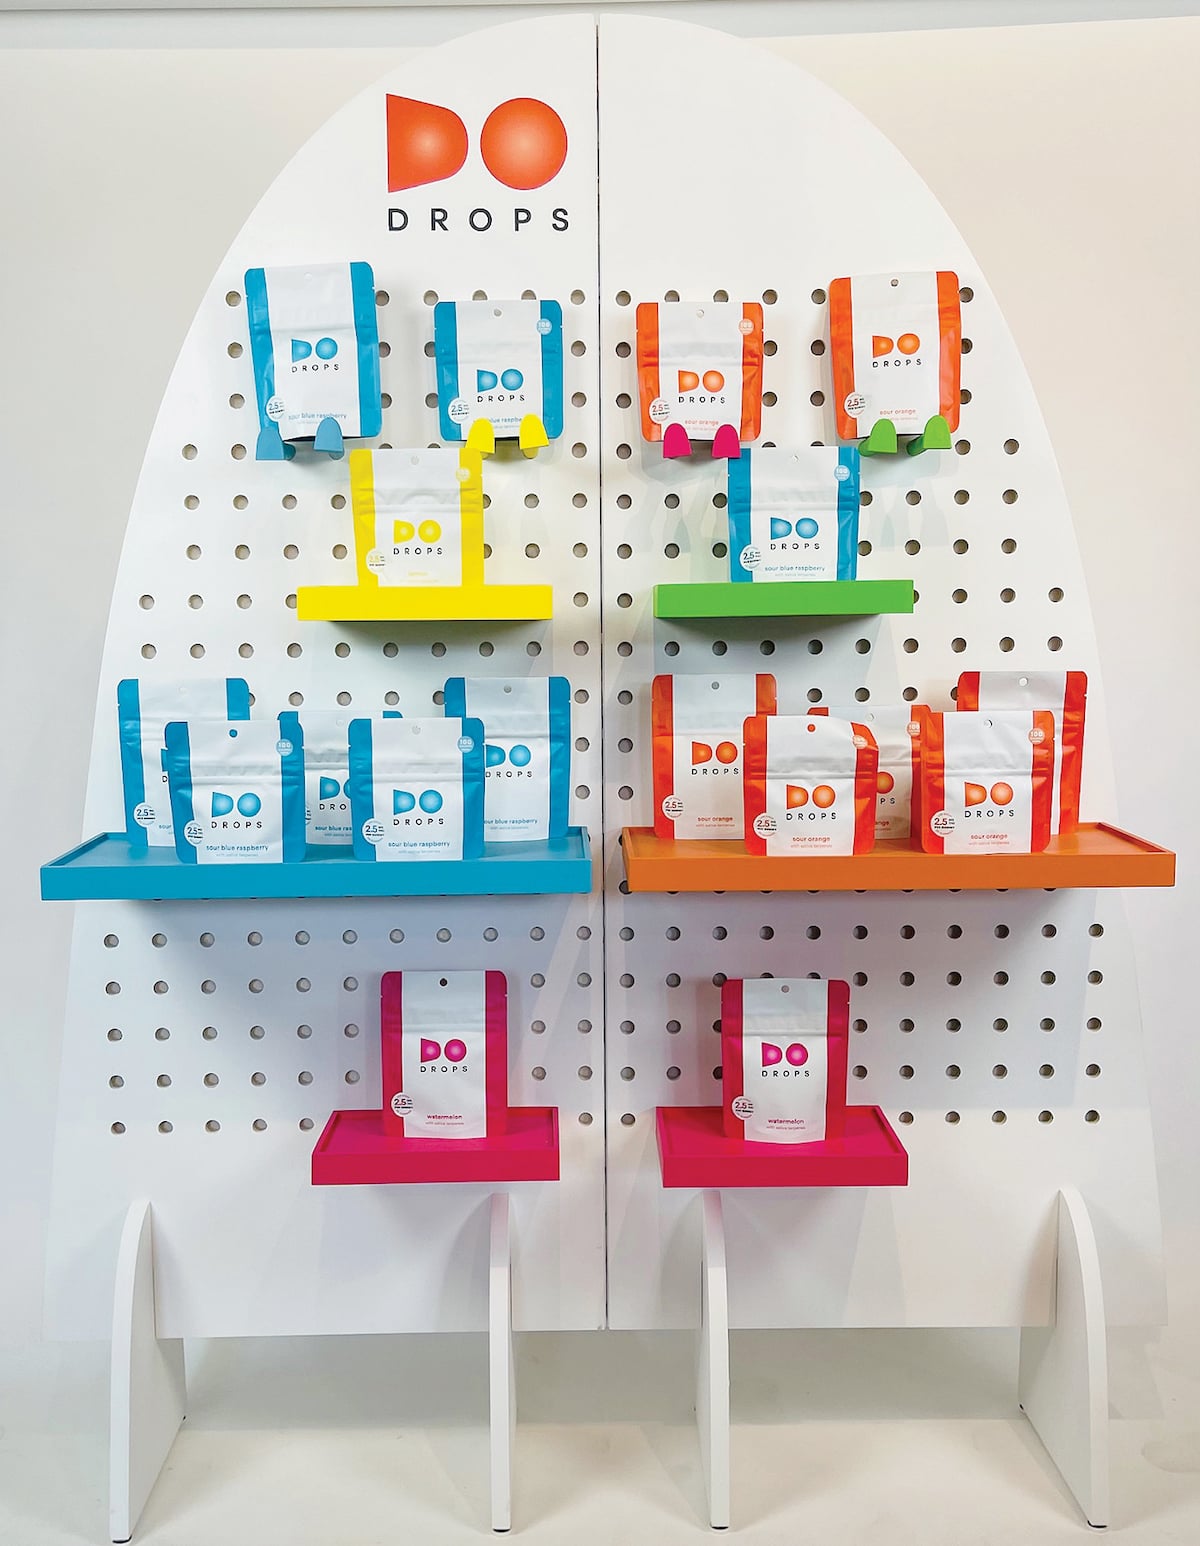 a wall display of Drop cannabis products in little blue orange and pink bags